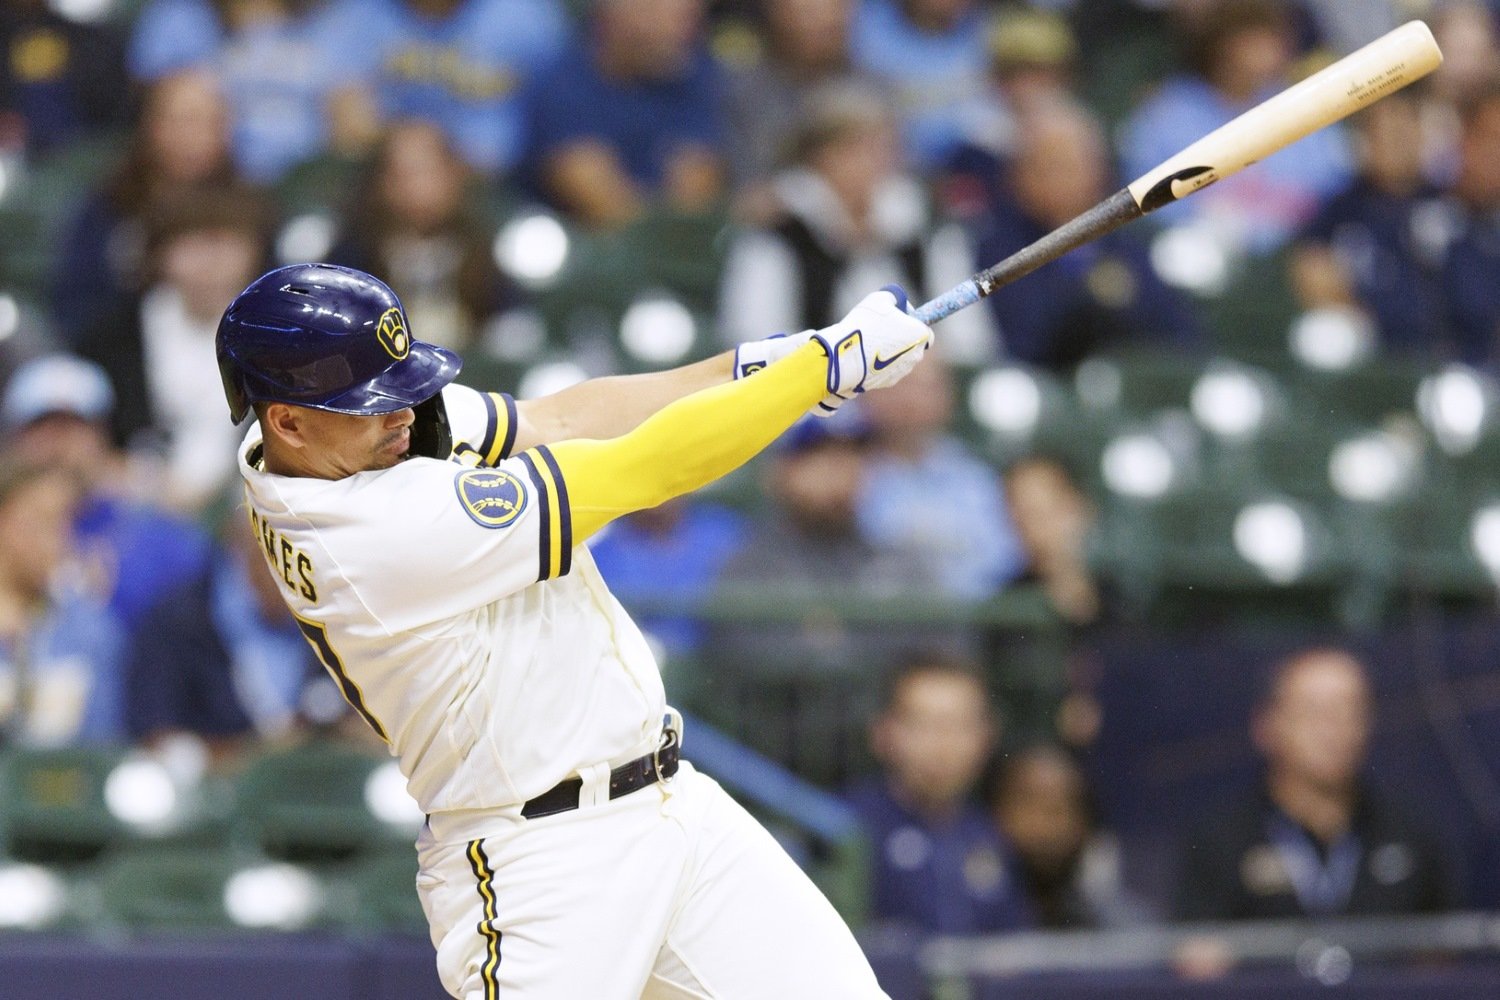 Adames hopes to remain with Brewers long term: 'I love playing